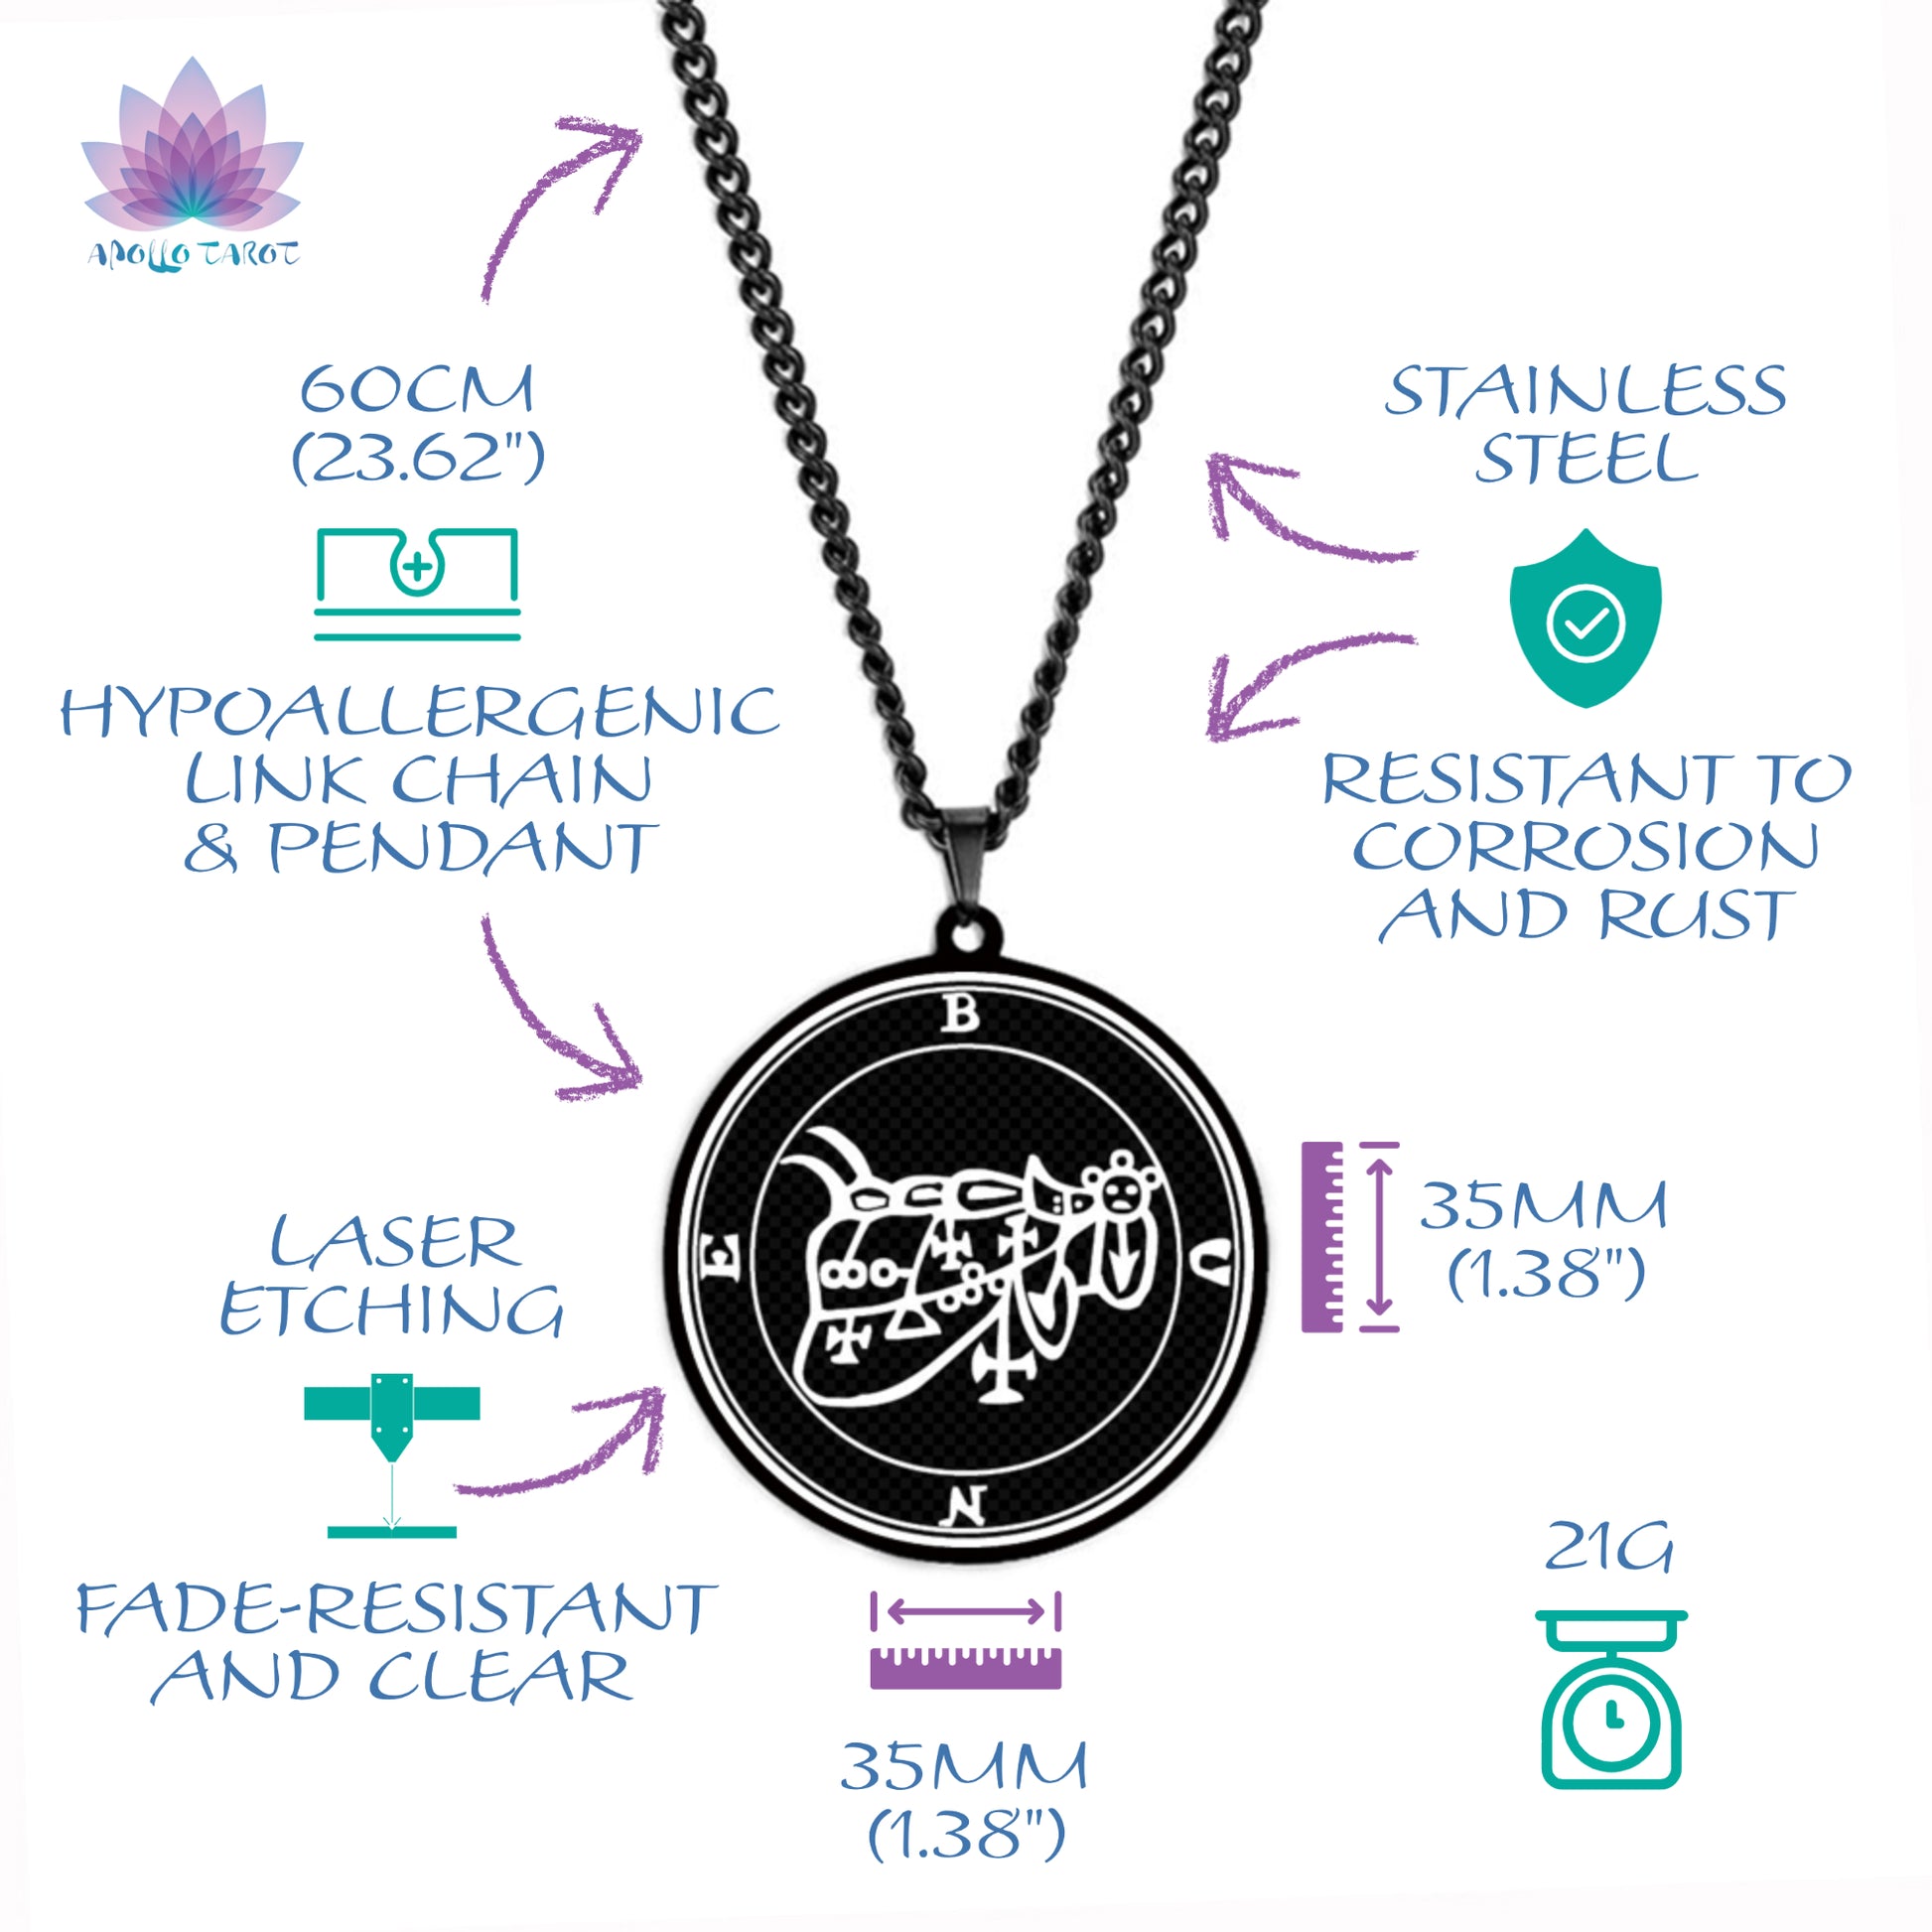 Black Necklace Of Demon Sigil From The Lesser Key Of Solomon | Goetia Magick Goth Pendant | Lemegeton Witchcraft Jewelry For Witchy Men | Apollo Tarot Jewelry Shop